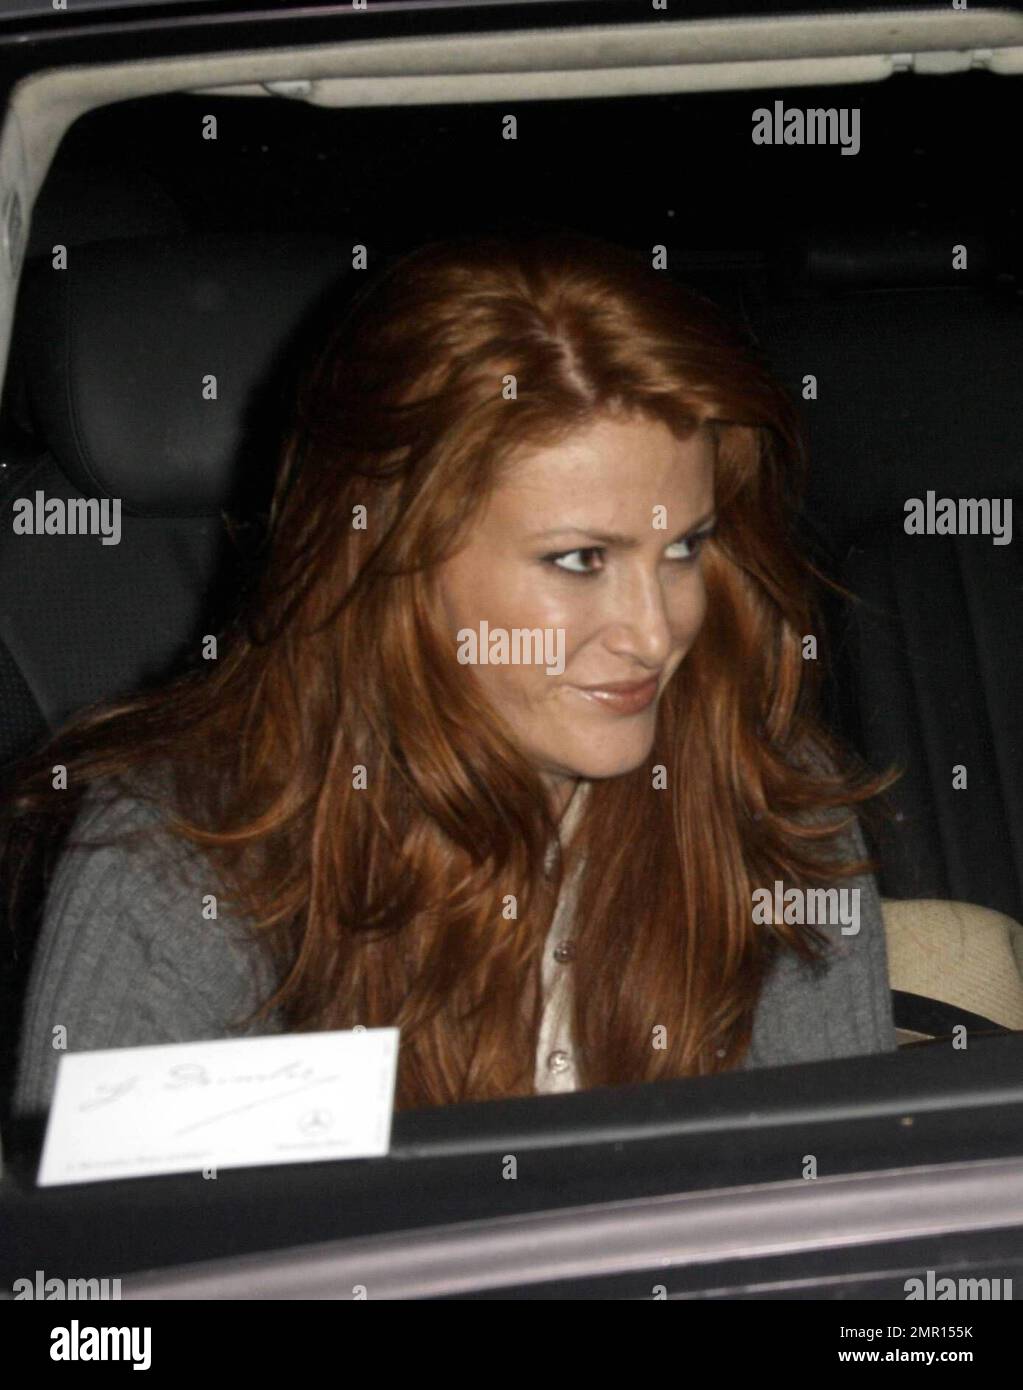 Exclusive!! It looks as if Angie Everhart and Joe Pesci are back together again as they leave the restaurant Ago. Everhart has reportedly accused ex-boyfriend, actor Chad Stansbury, of violently choking her during an incident in August. But, according to the reports, the LA County District Attorney rejected the case after it decided there wasn't enough evidence to prosecute. Angie told the cops that Stansbury choked her during a heated argument and fled the scene. He was then arrested and booked on suspicion of domestic violence. Los Angeles, CA. 10/2/08. All Stock Photo